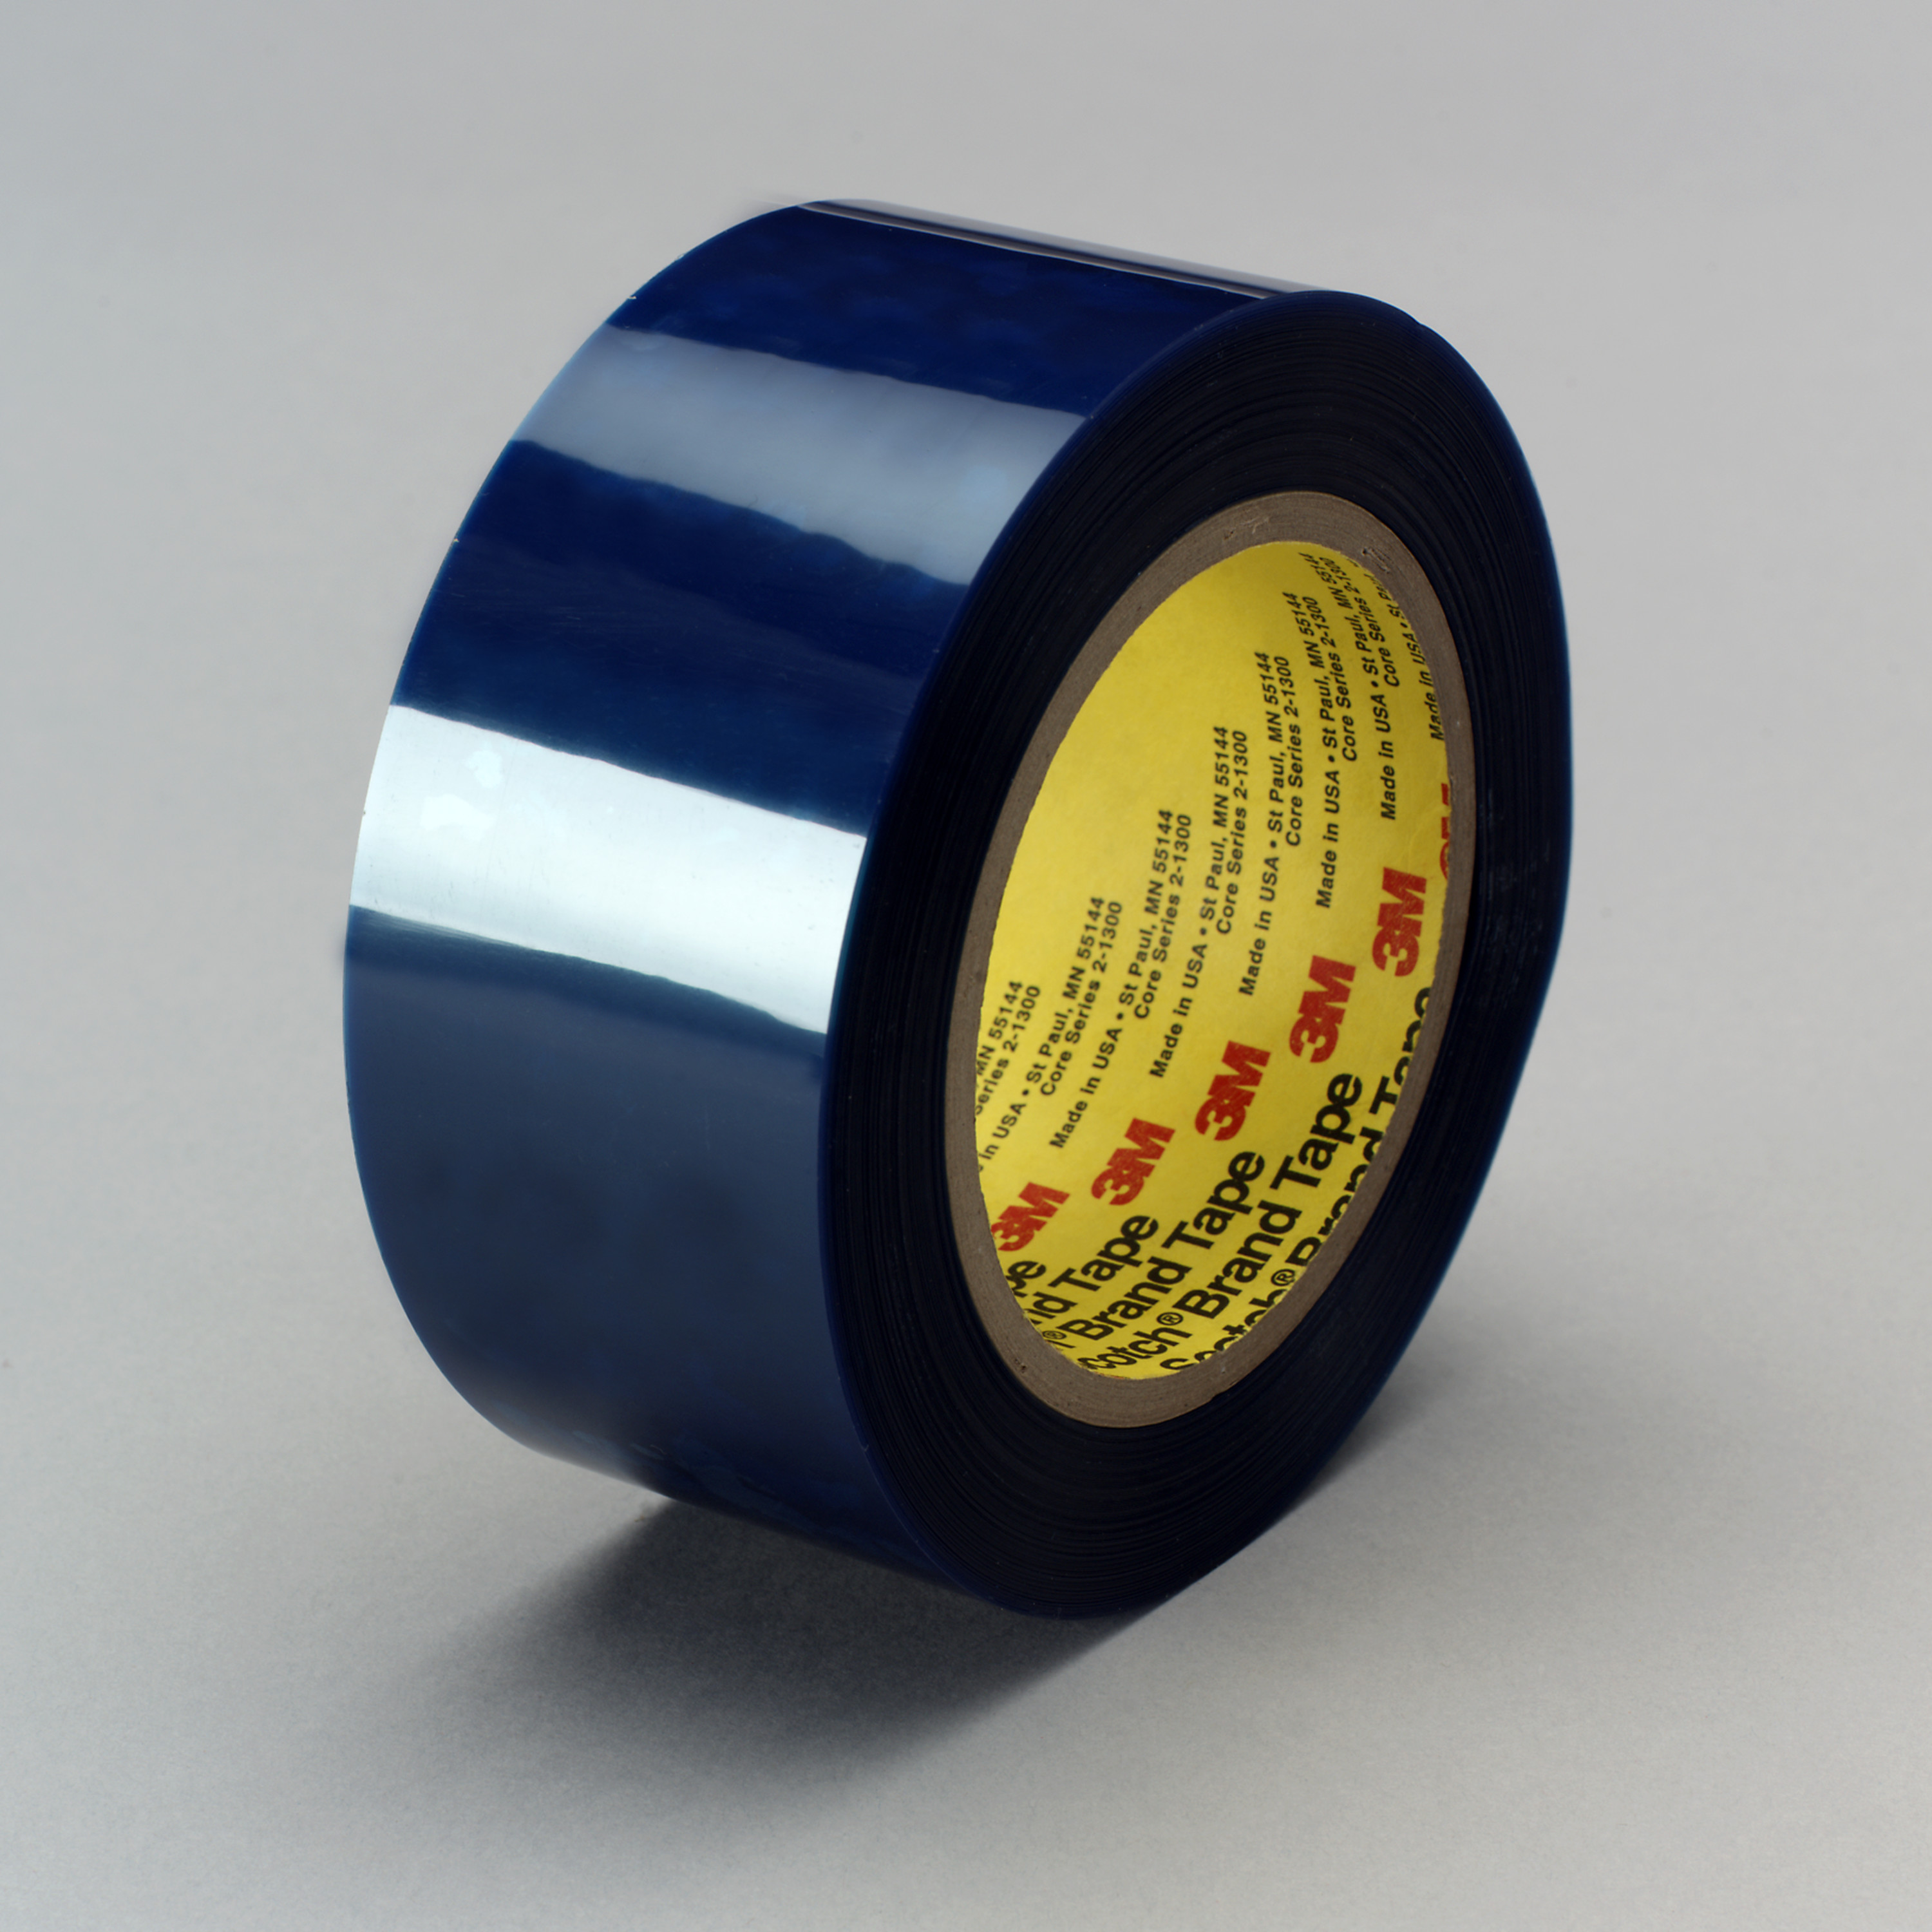 3M™ Polyester Tape 8902, Blue, 6 in x 72 yd, 3.4 mil, 4 rolls per case